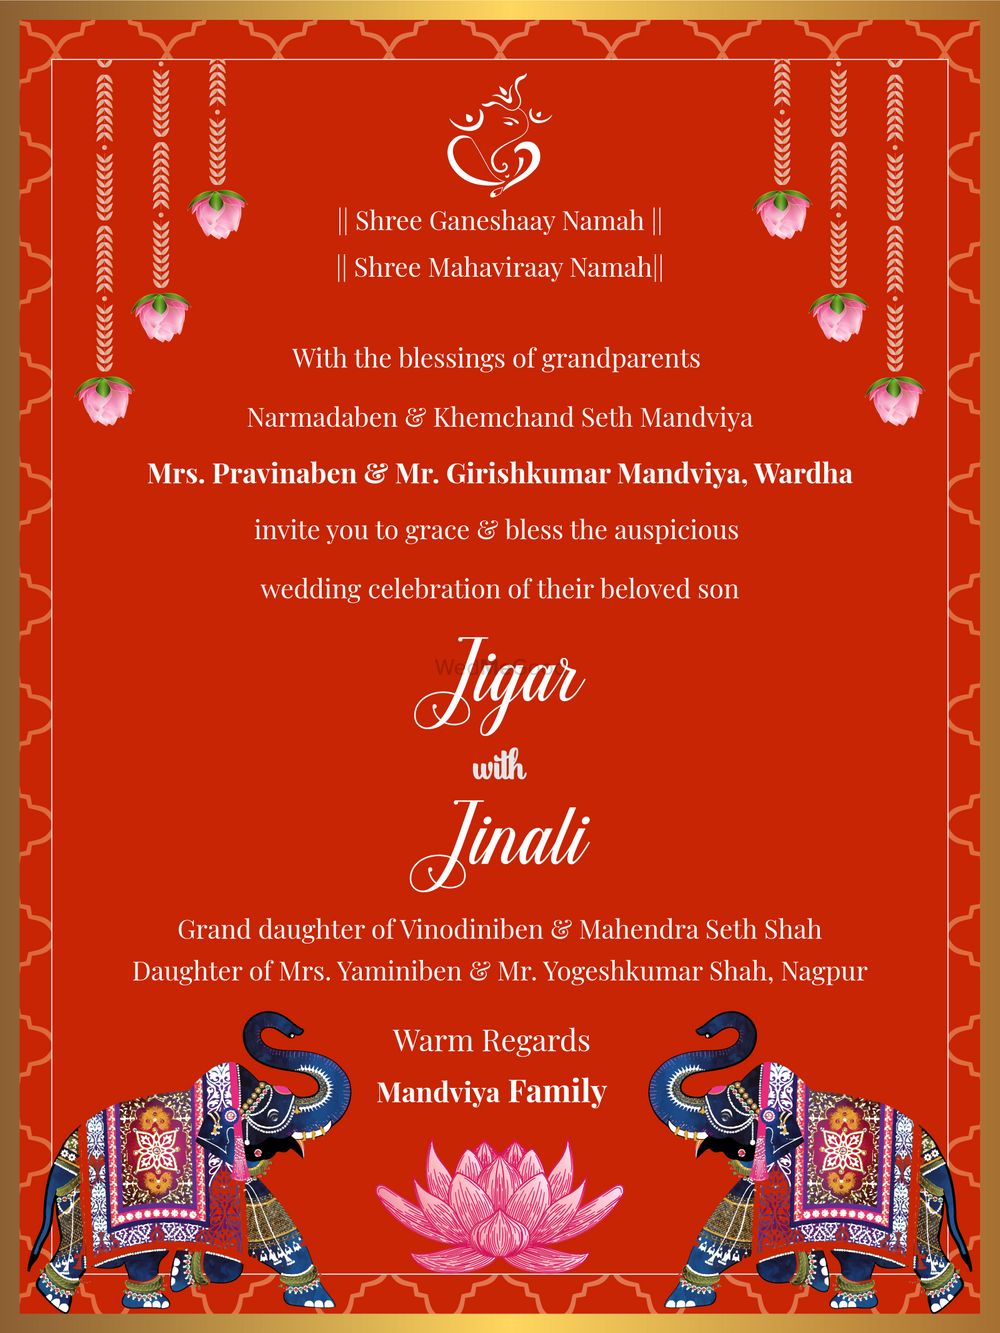 Photo From Jigar + Jinali - By Designs by Gulmohar Inc.